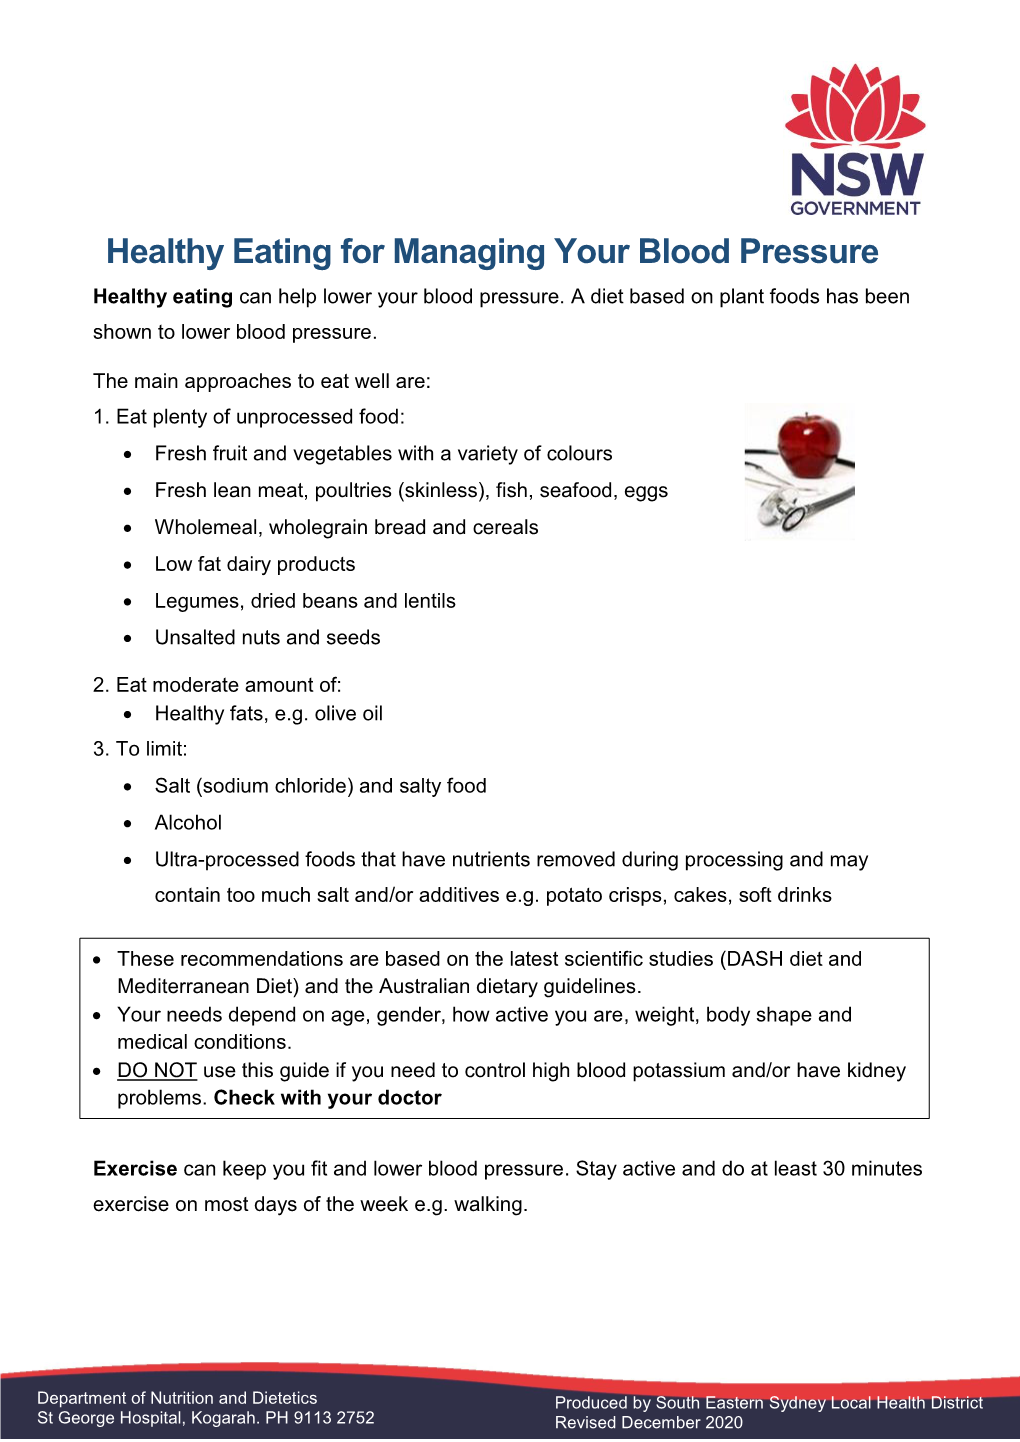 Healthy Eating for High Blood Pressure